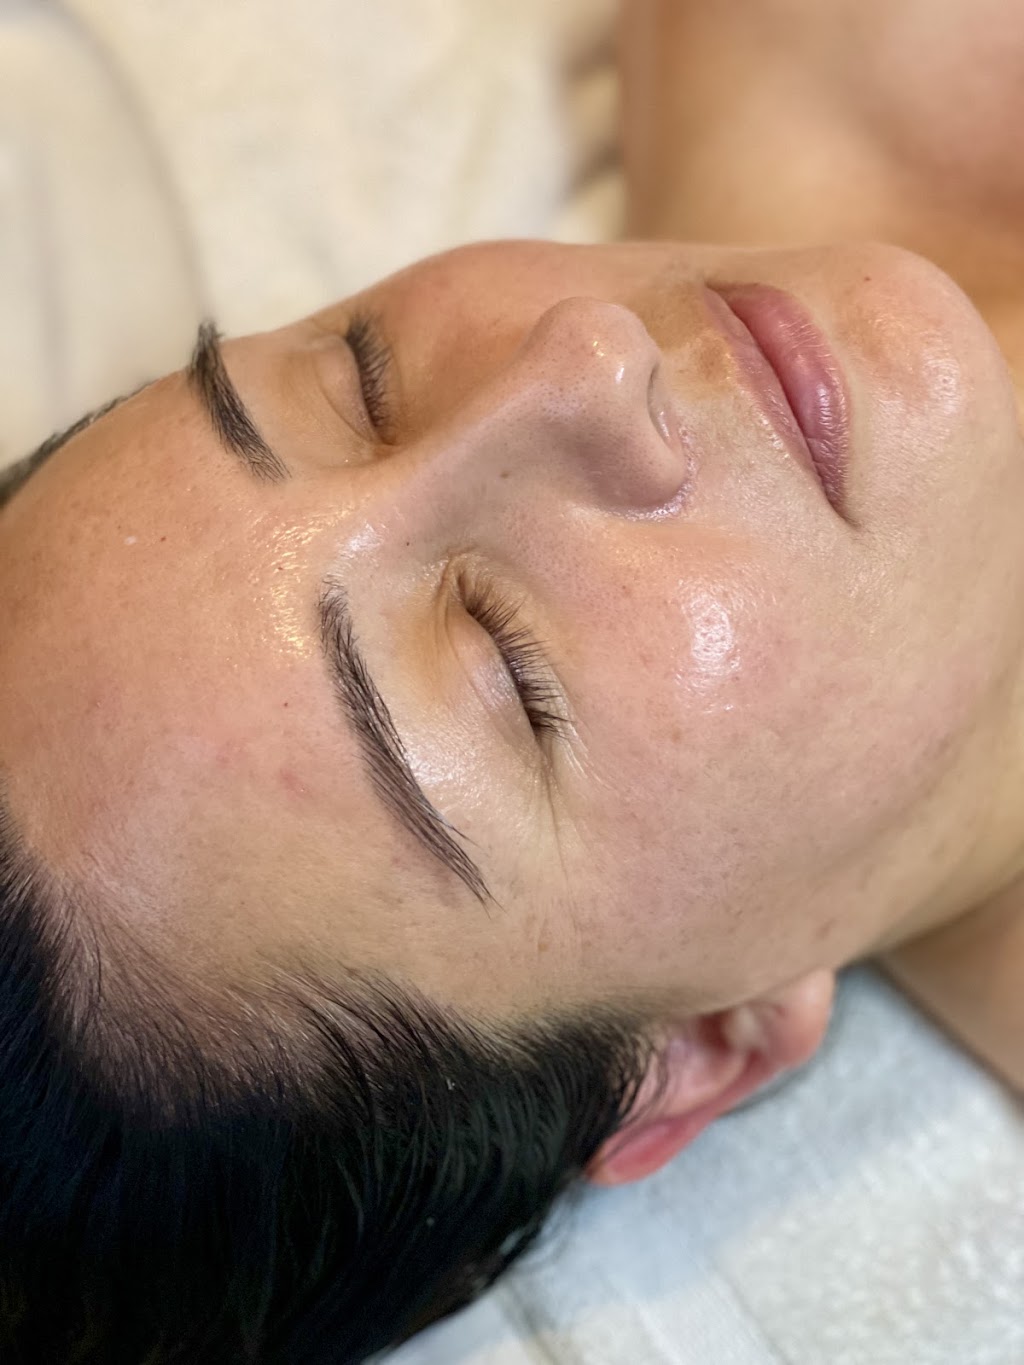 Balanced Skin and Acne Clinic | 585 Coombsville Rd, Napa, CA 94558 | Phone: (707) 227-7096